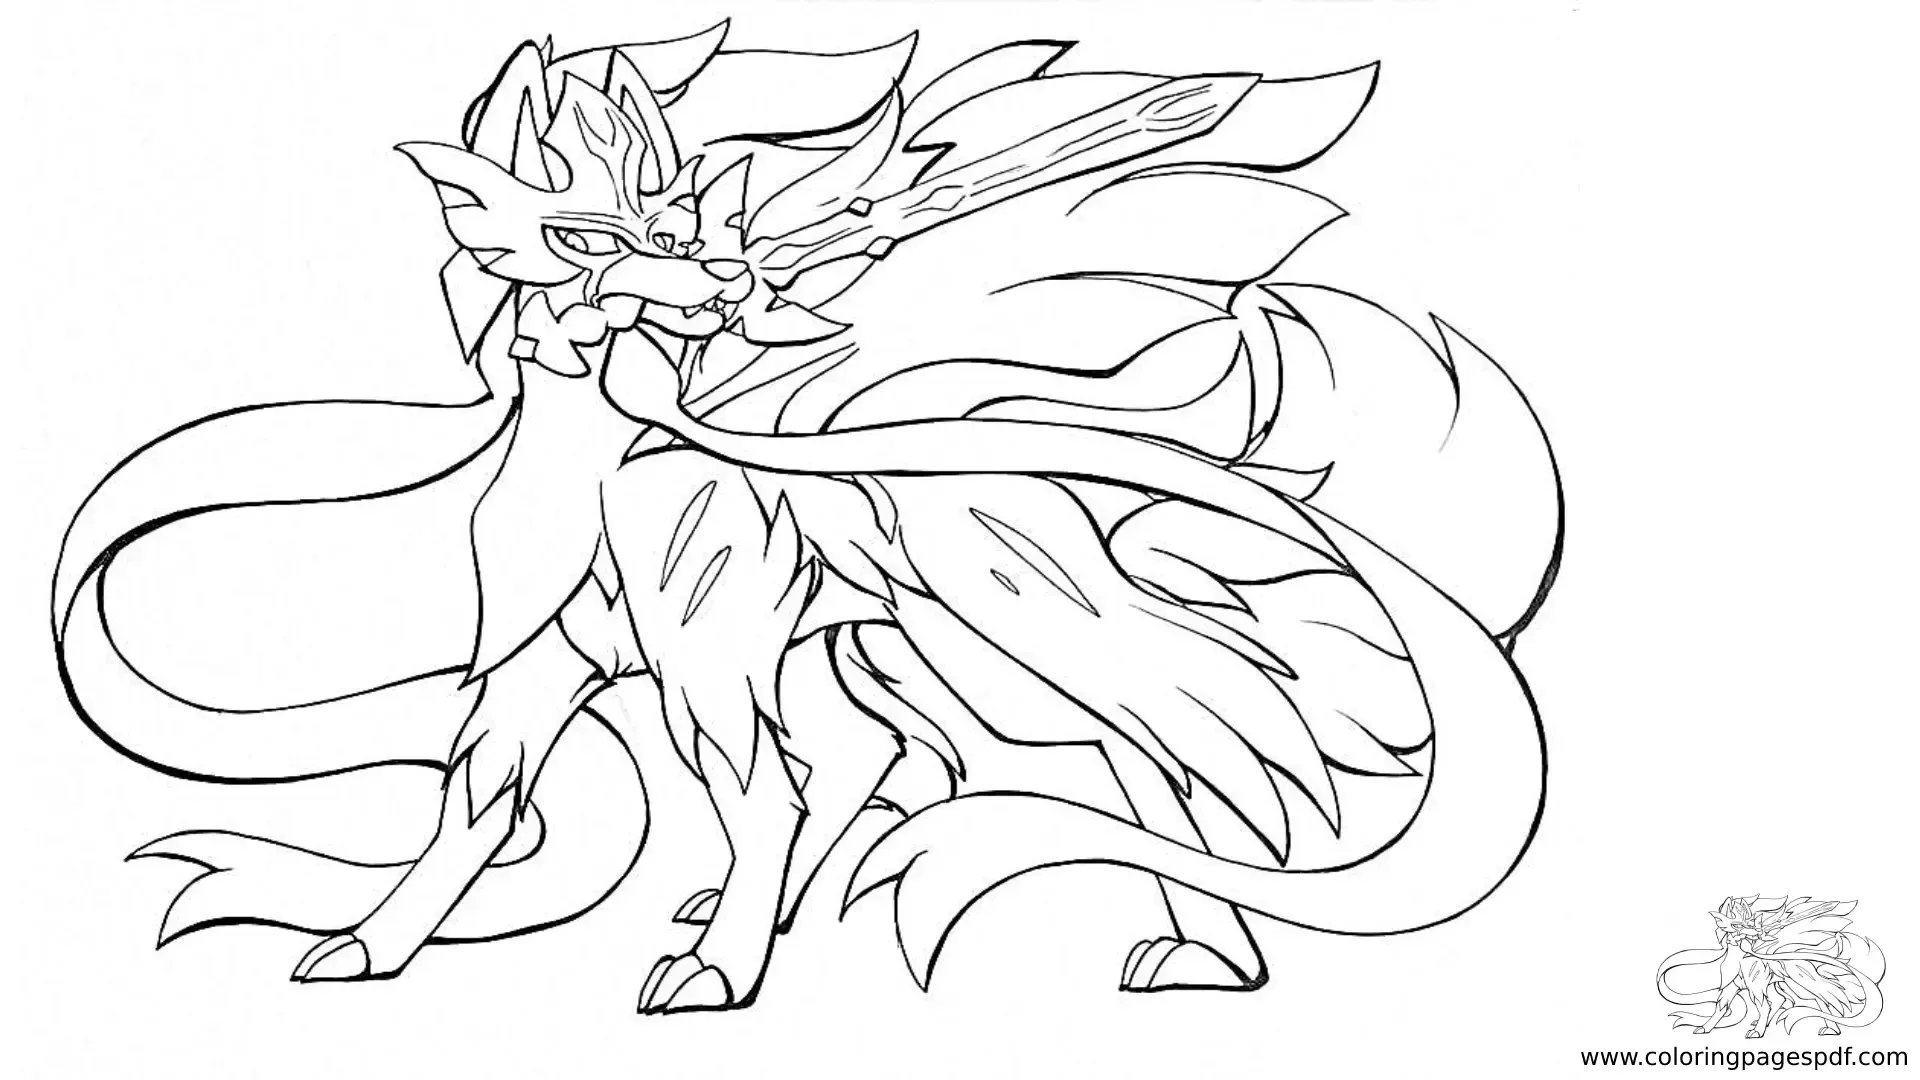 Coloring Page Of Crowned Sword Zacian Looking Away